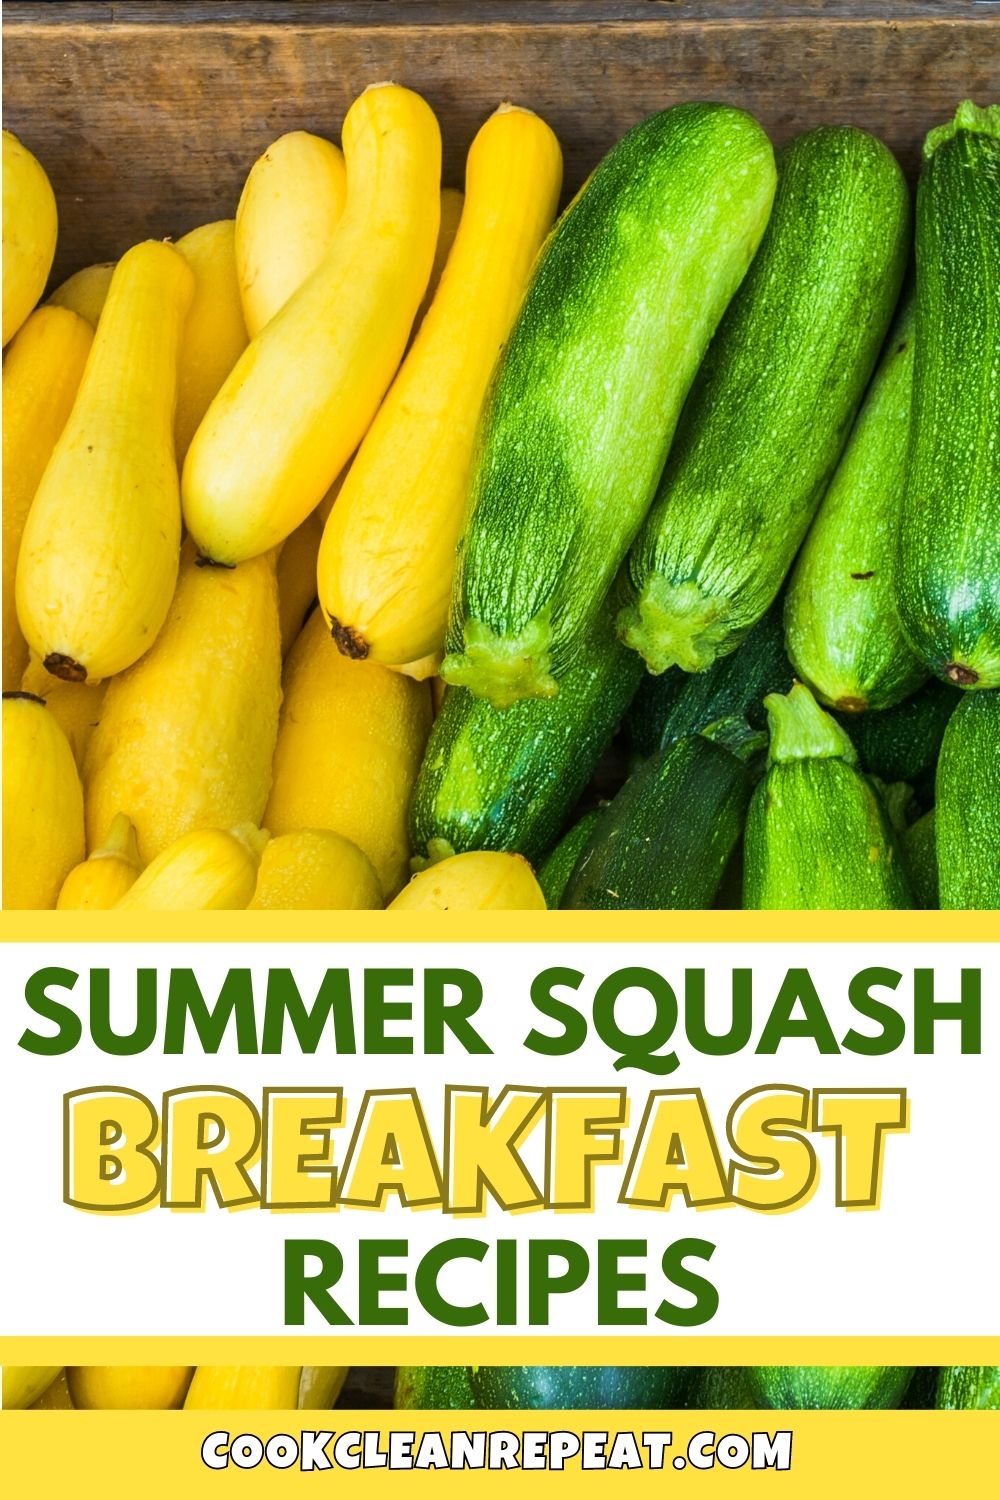 image made for Pinterest that says Summer Squash Breakfast Recipes